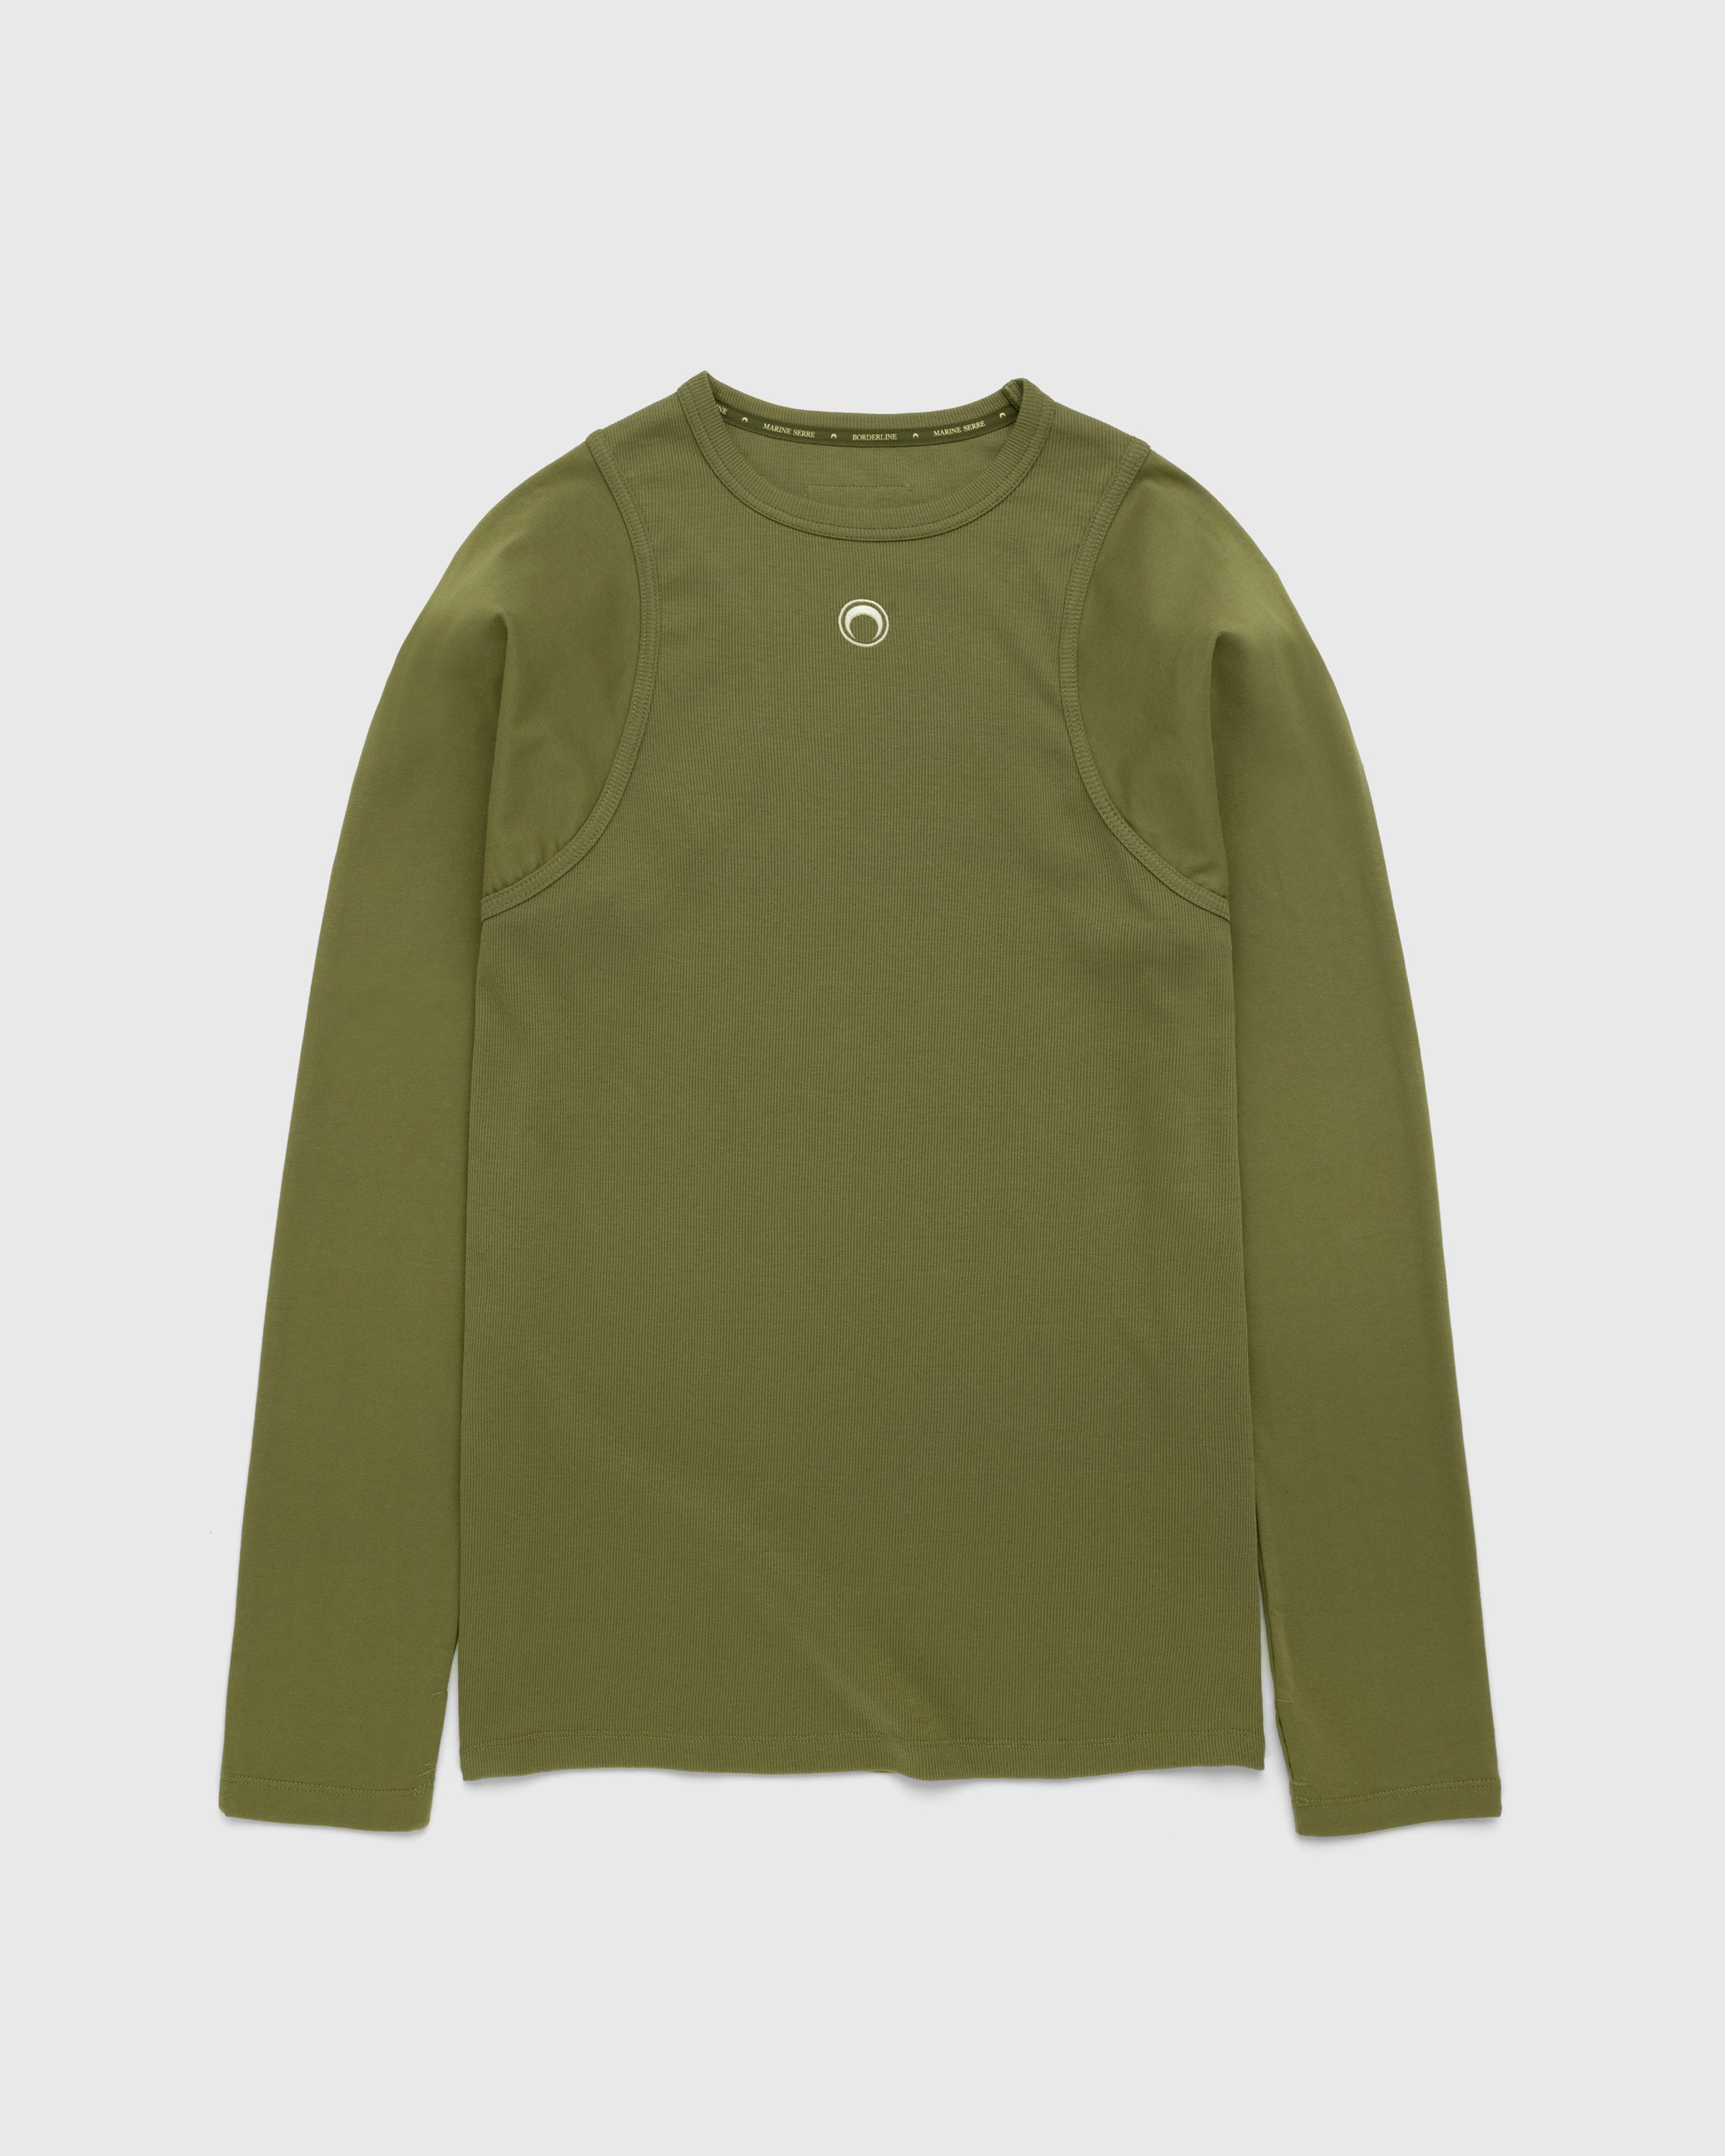 Marine Serre - Organic Cotton Relaxed Long-Sleeve Top Green - Clothing - Green - Image 1